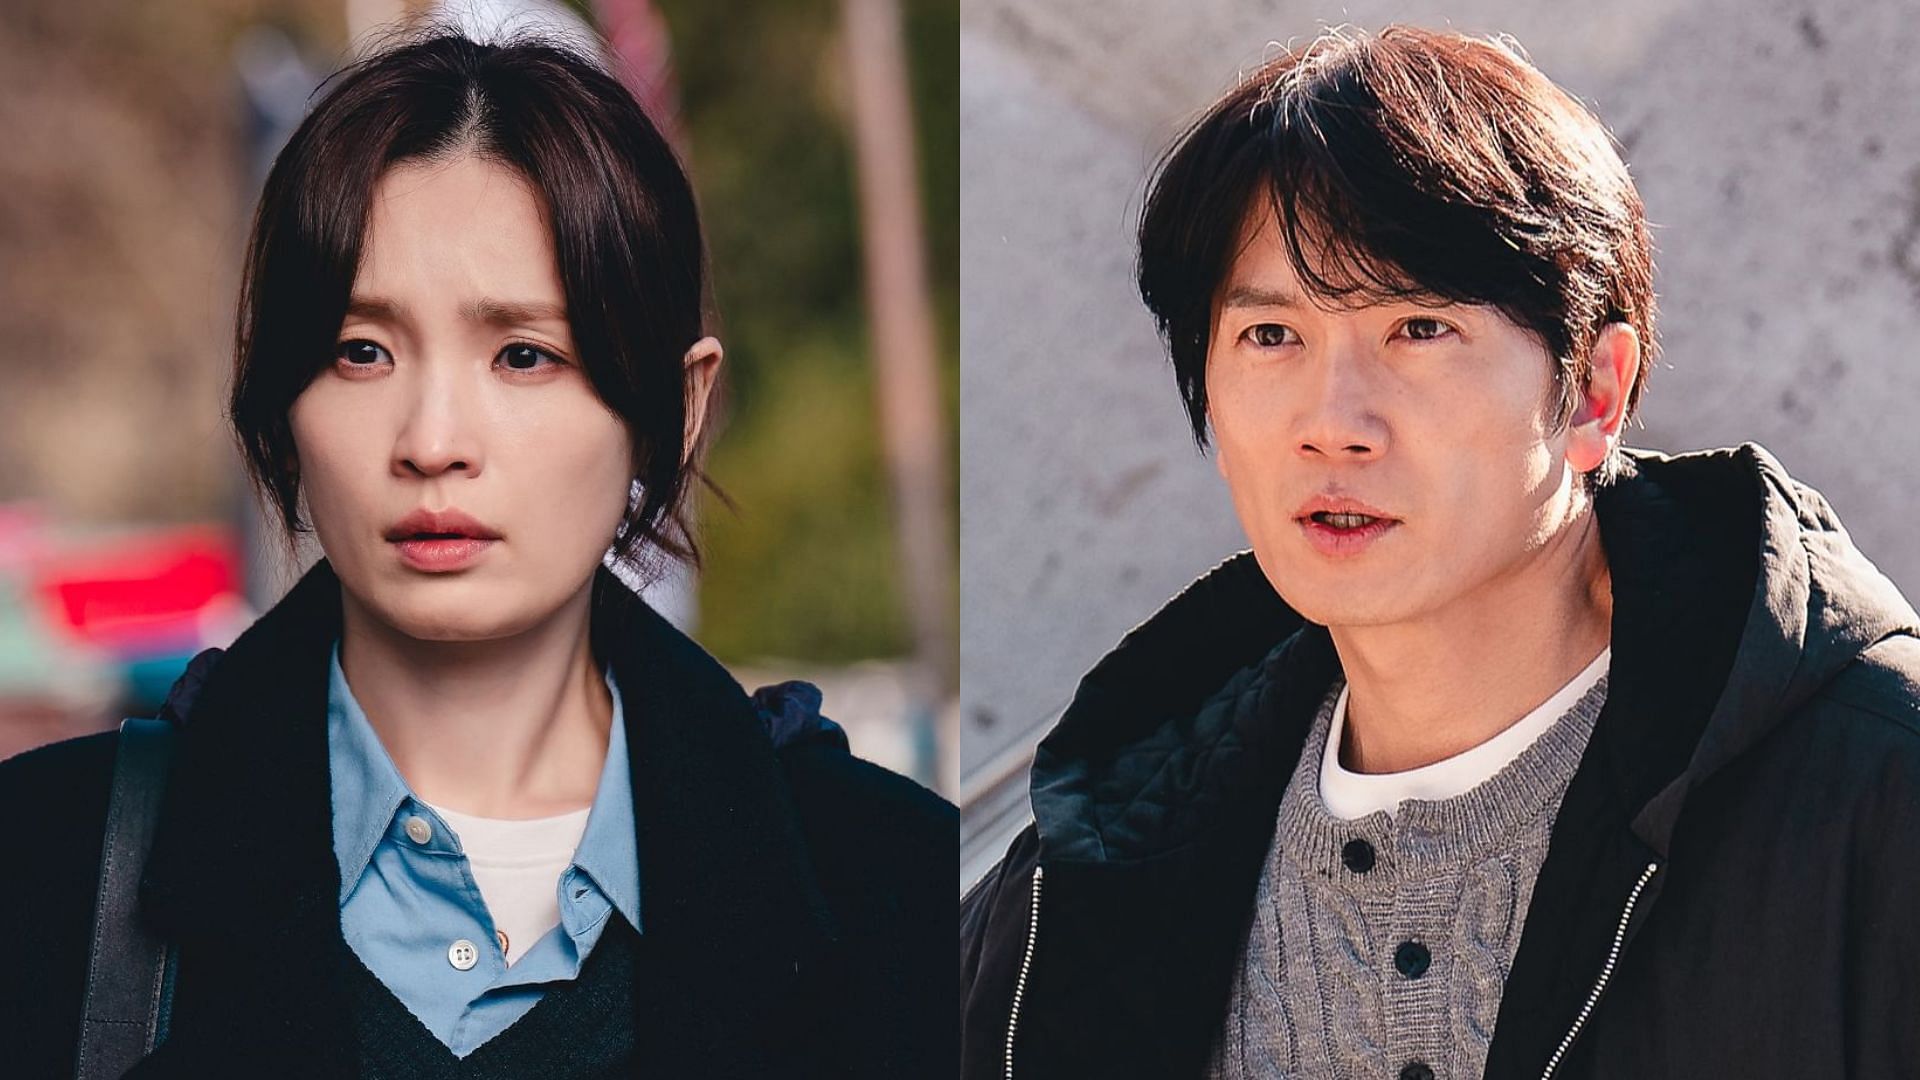 Connection Ep 7-8 recap featuring Jeon Mi-do &amp; Ji Sung (Images Via Instagram/@sbsdrama.official) 